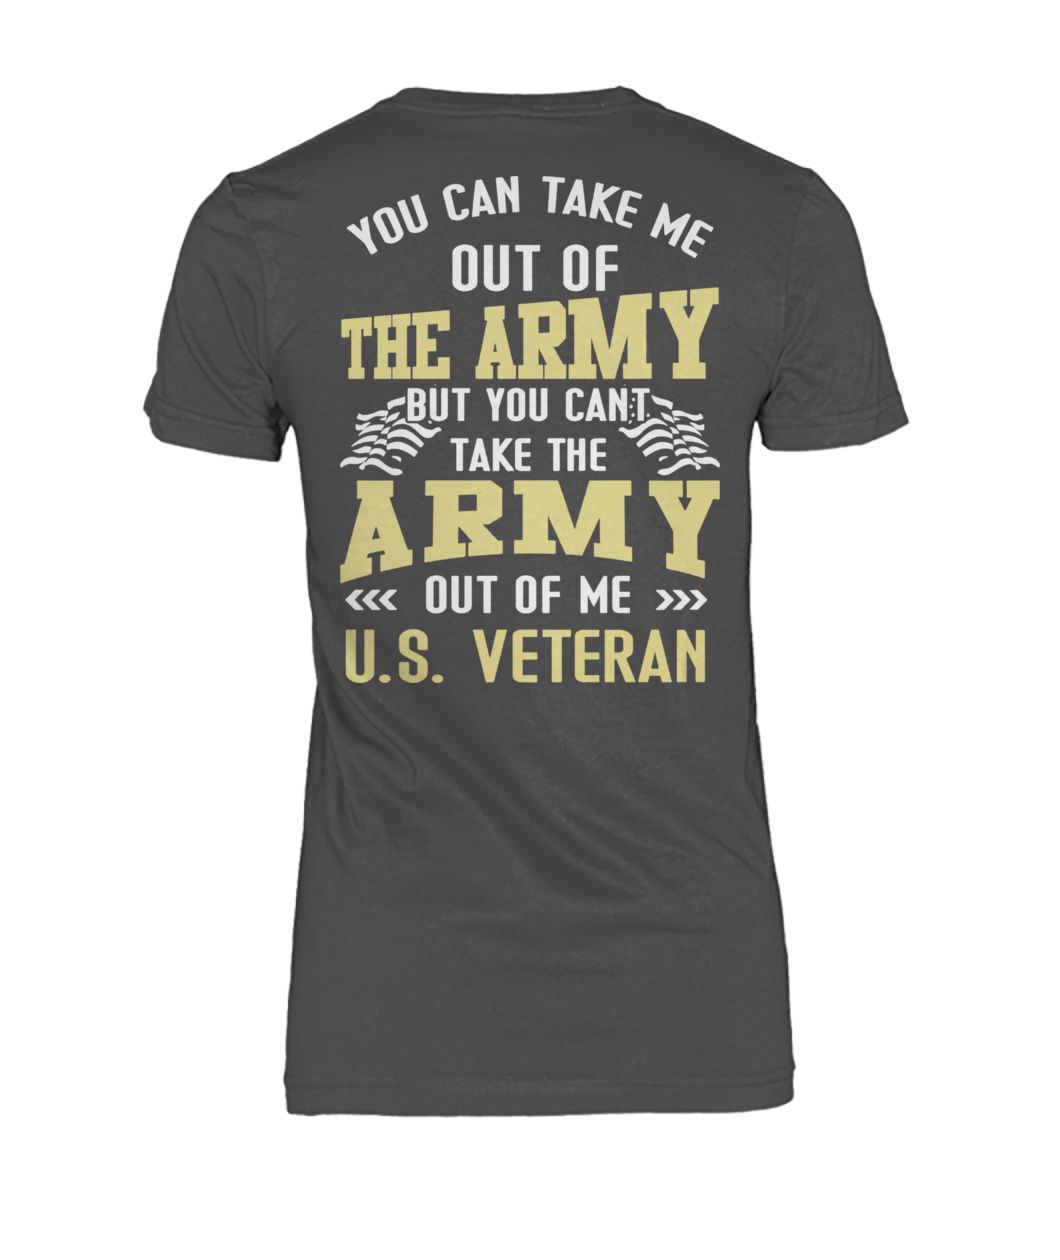 You can take me out of the army but you can't take the army out of me US veteran women's crew tee